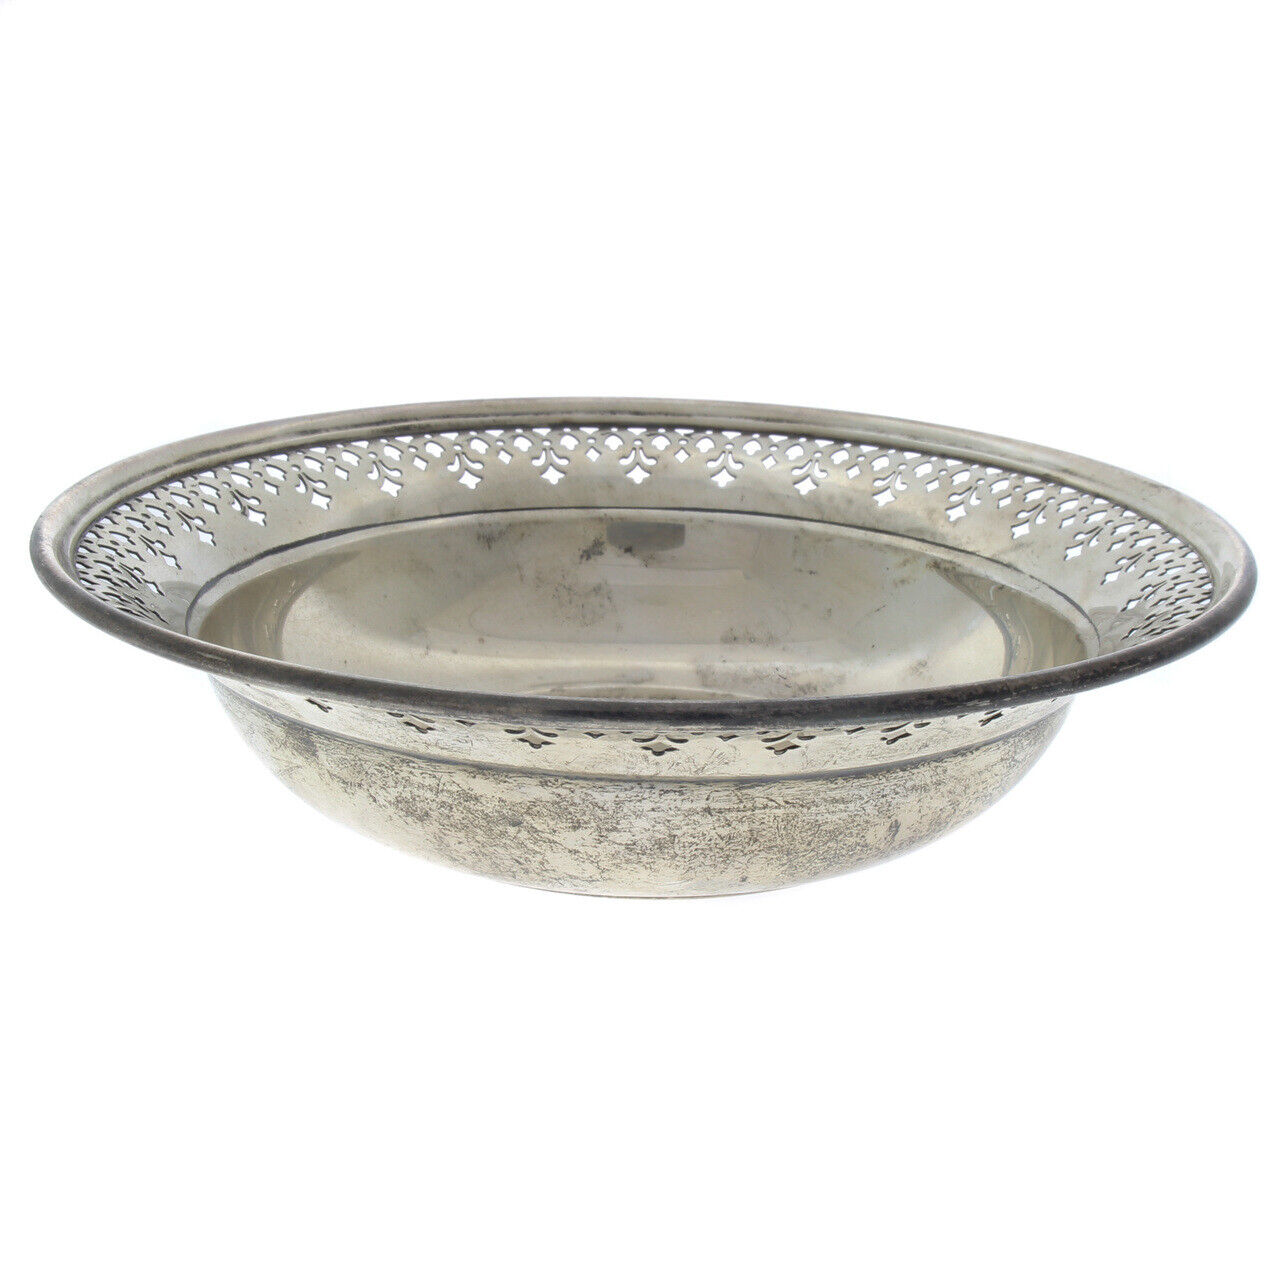 Tiffany & Co. Sterling Silver Reticulated Bowl Circa 1926